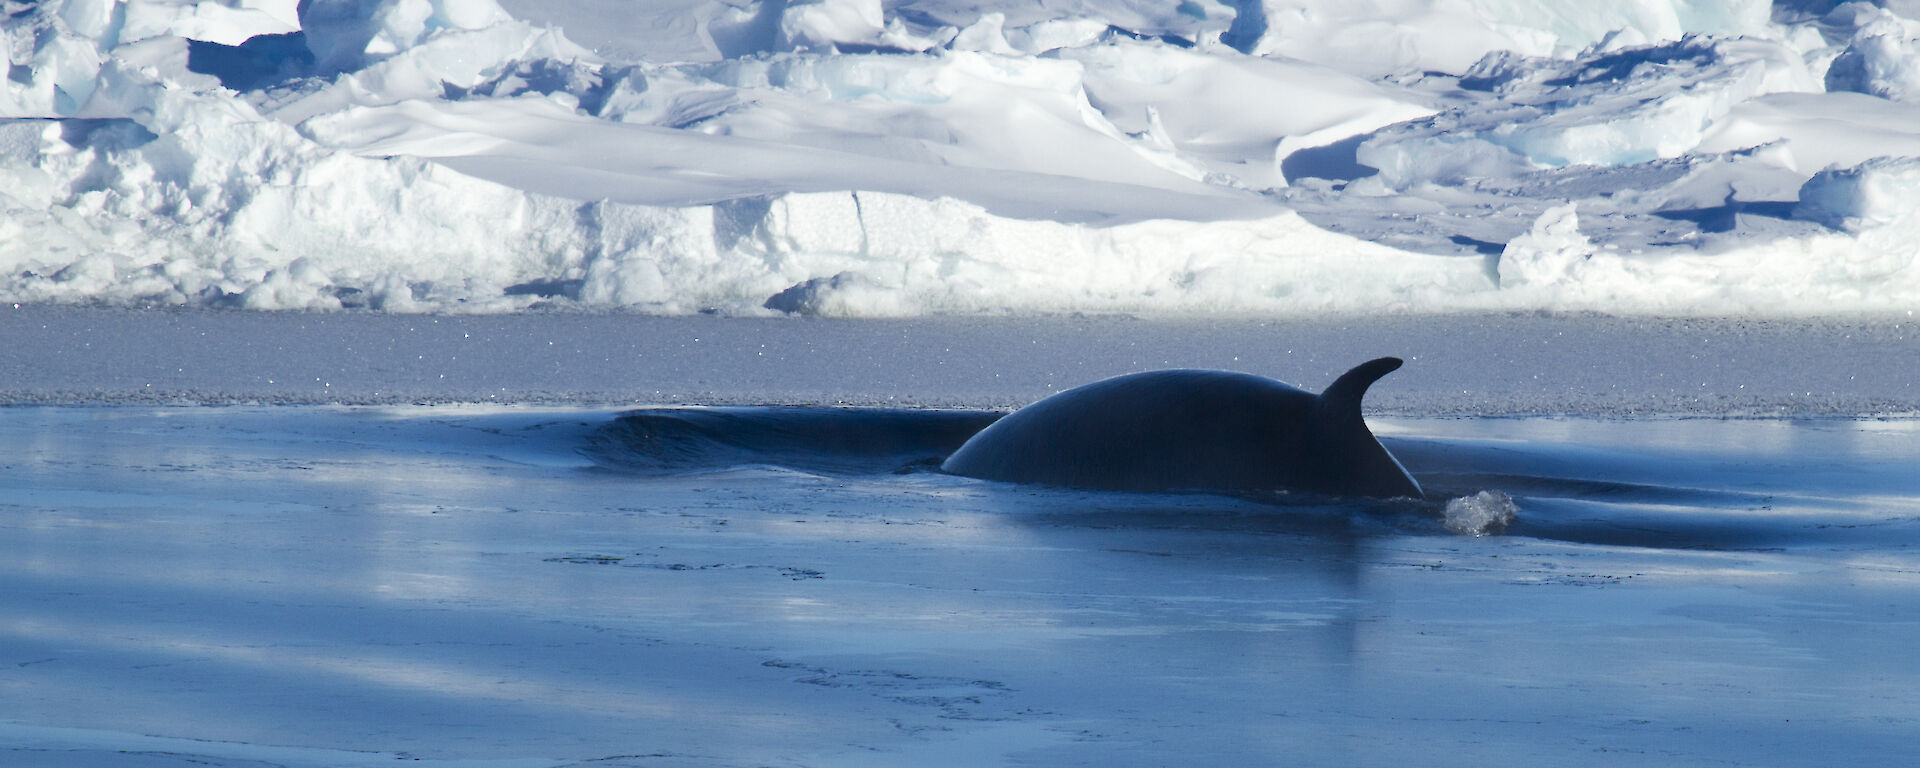 dorsal fin of whale with ice in background